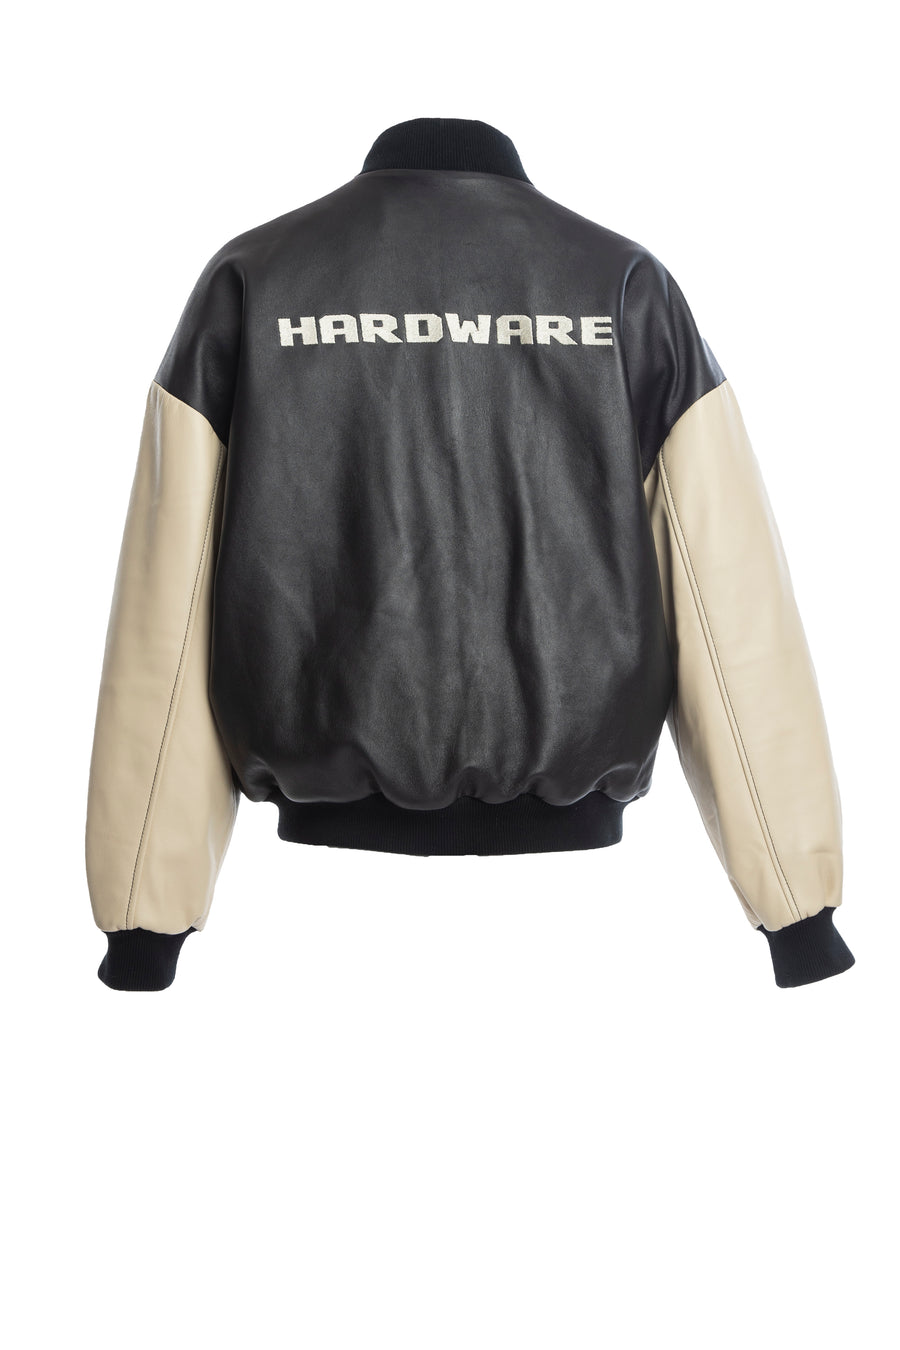 THE SQUAD LEATHER BOMBER IN BLACK AND CREAM